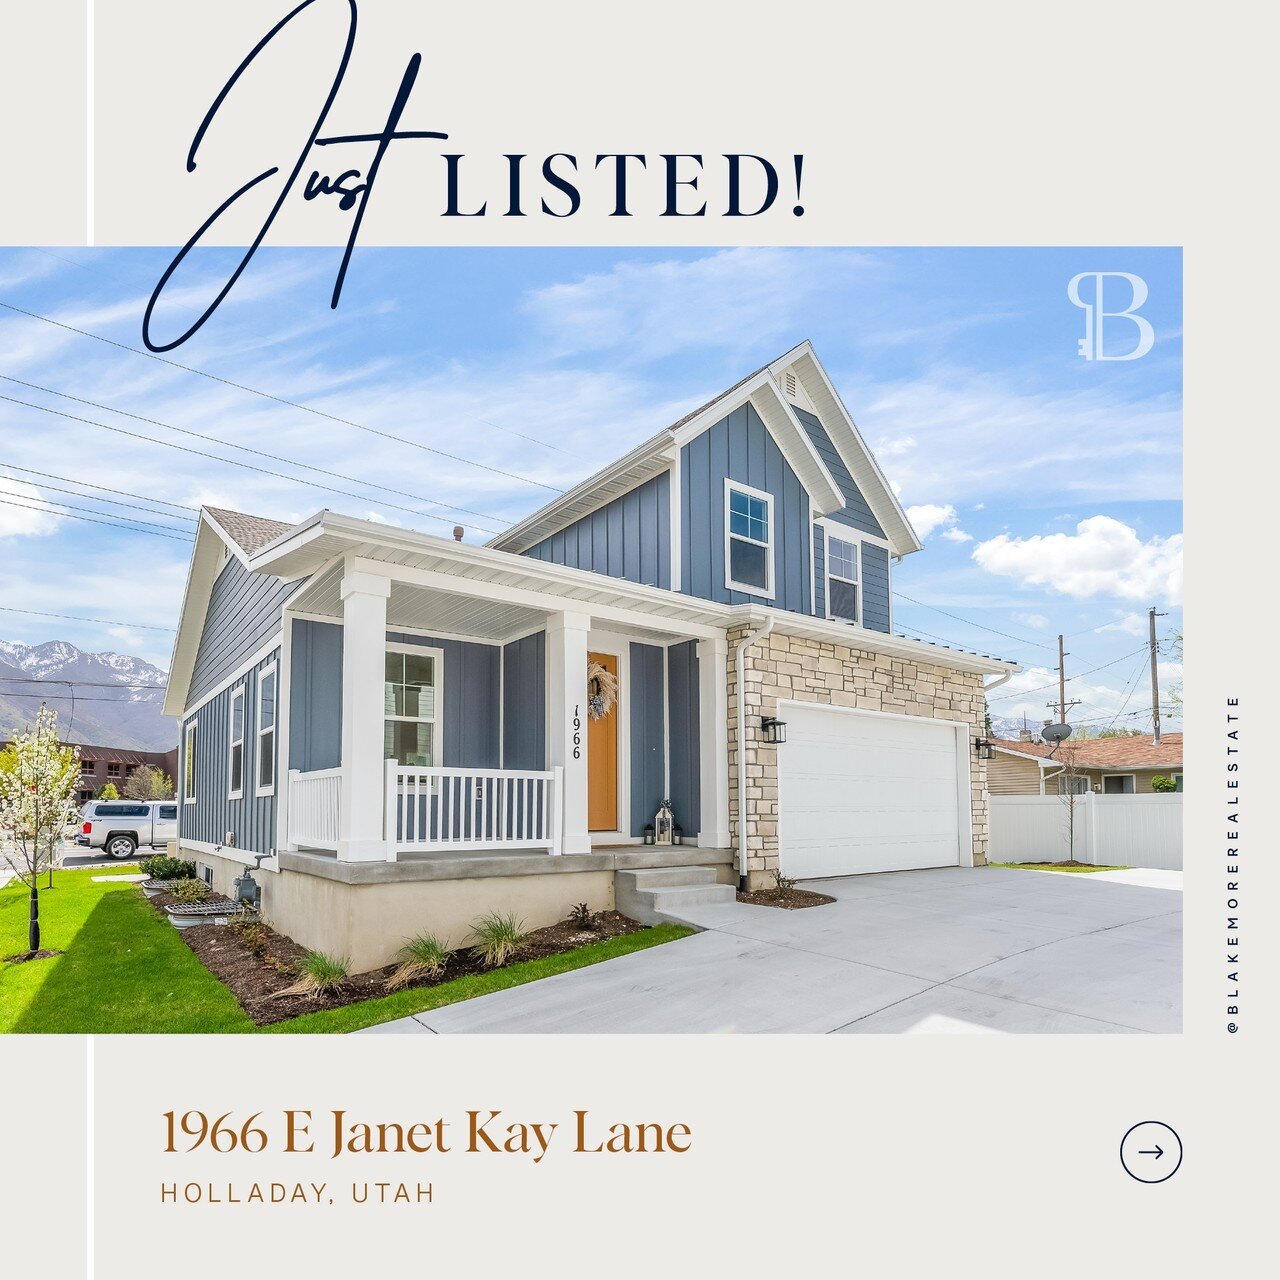 JUST LISTED! Welcome to your dream home! ⁠
⁠
This stunning custom build by Cottle Homes is located in the heart of Holladay, with incredible mountain views, and offers an array of luxurious features that are sure to impress. ⁠
⁠
The kitchen is outfit